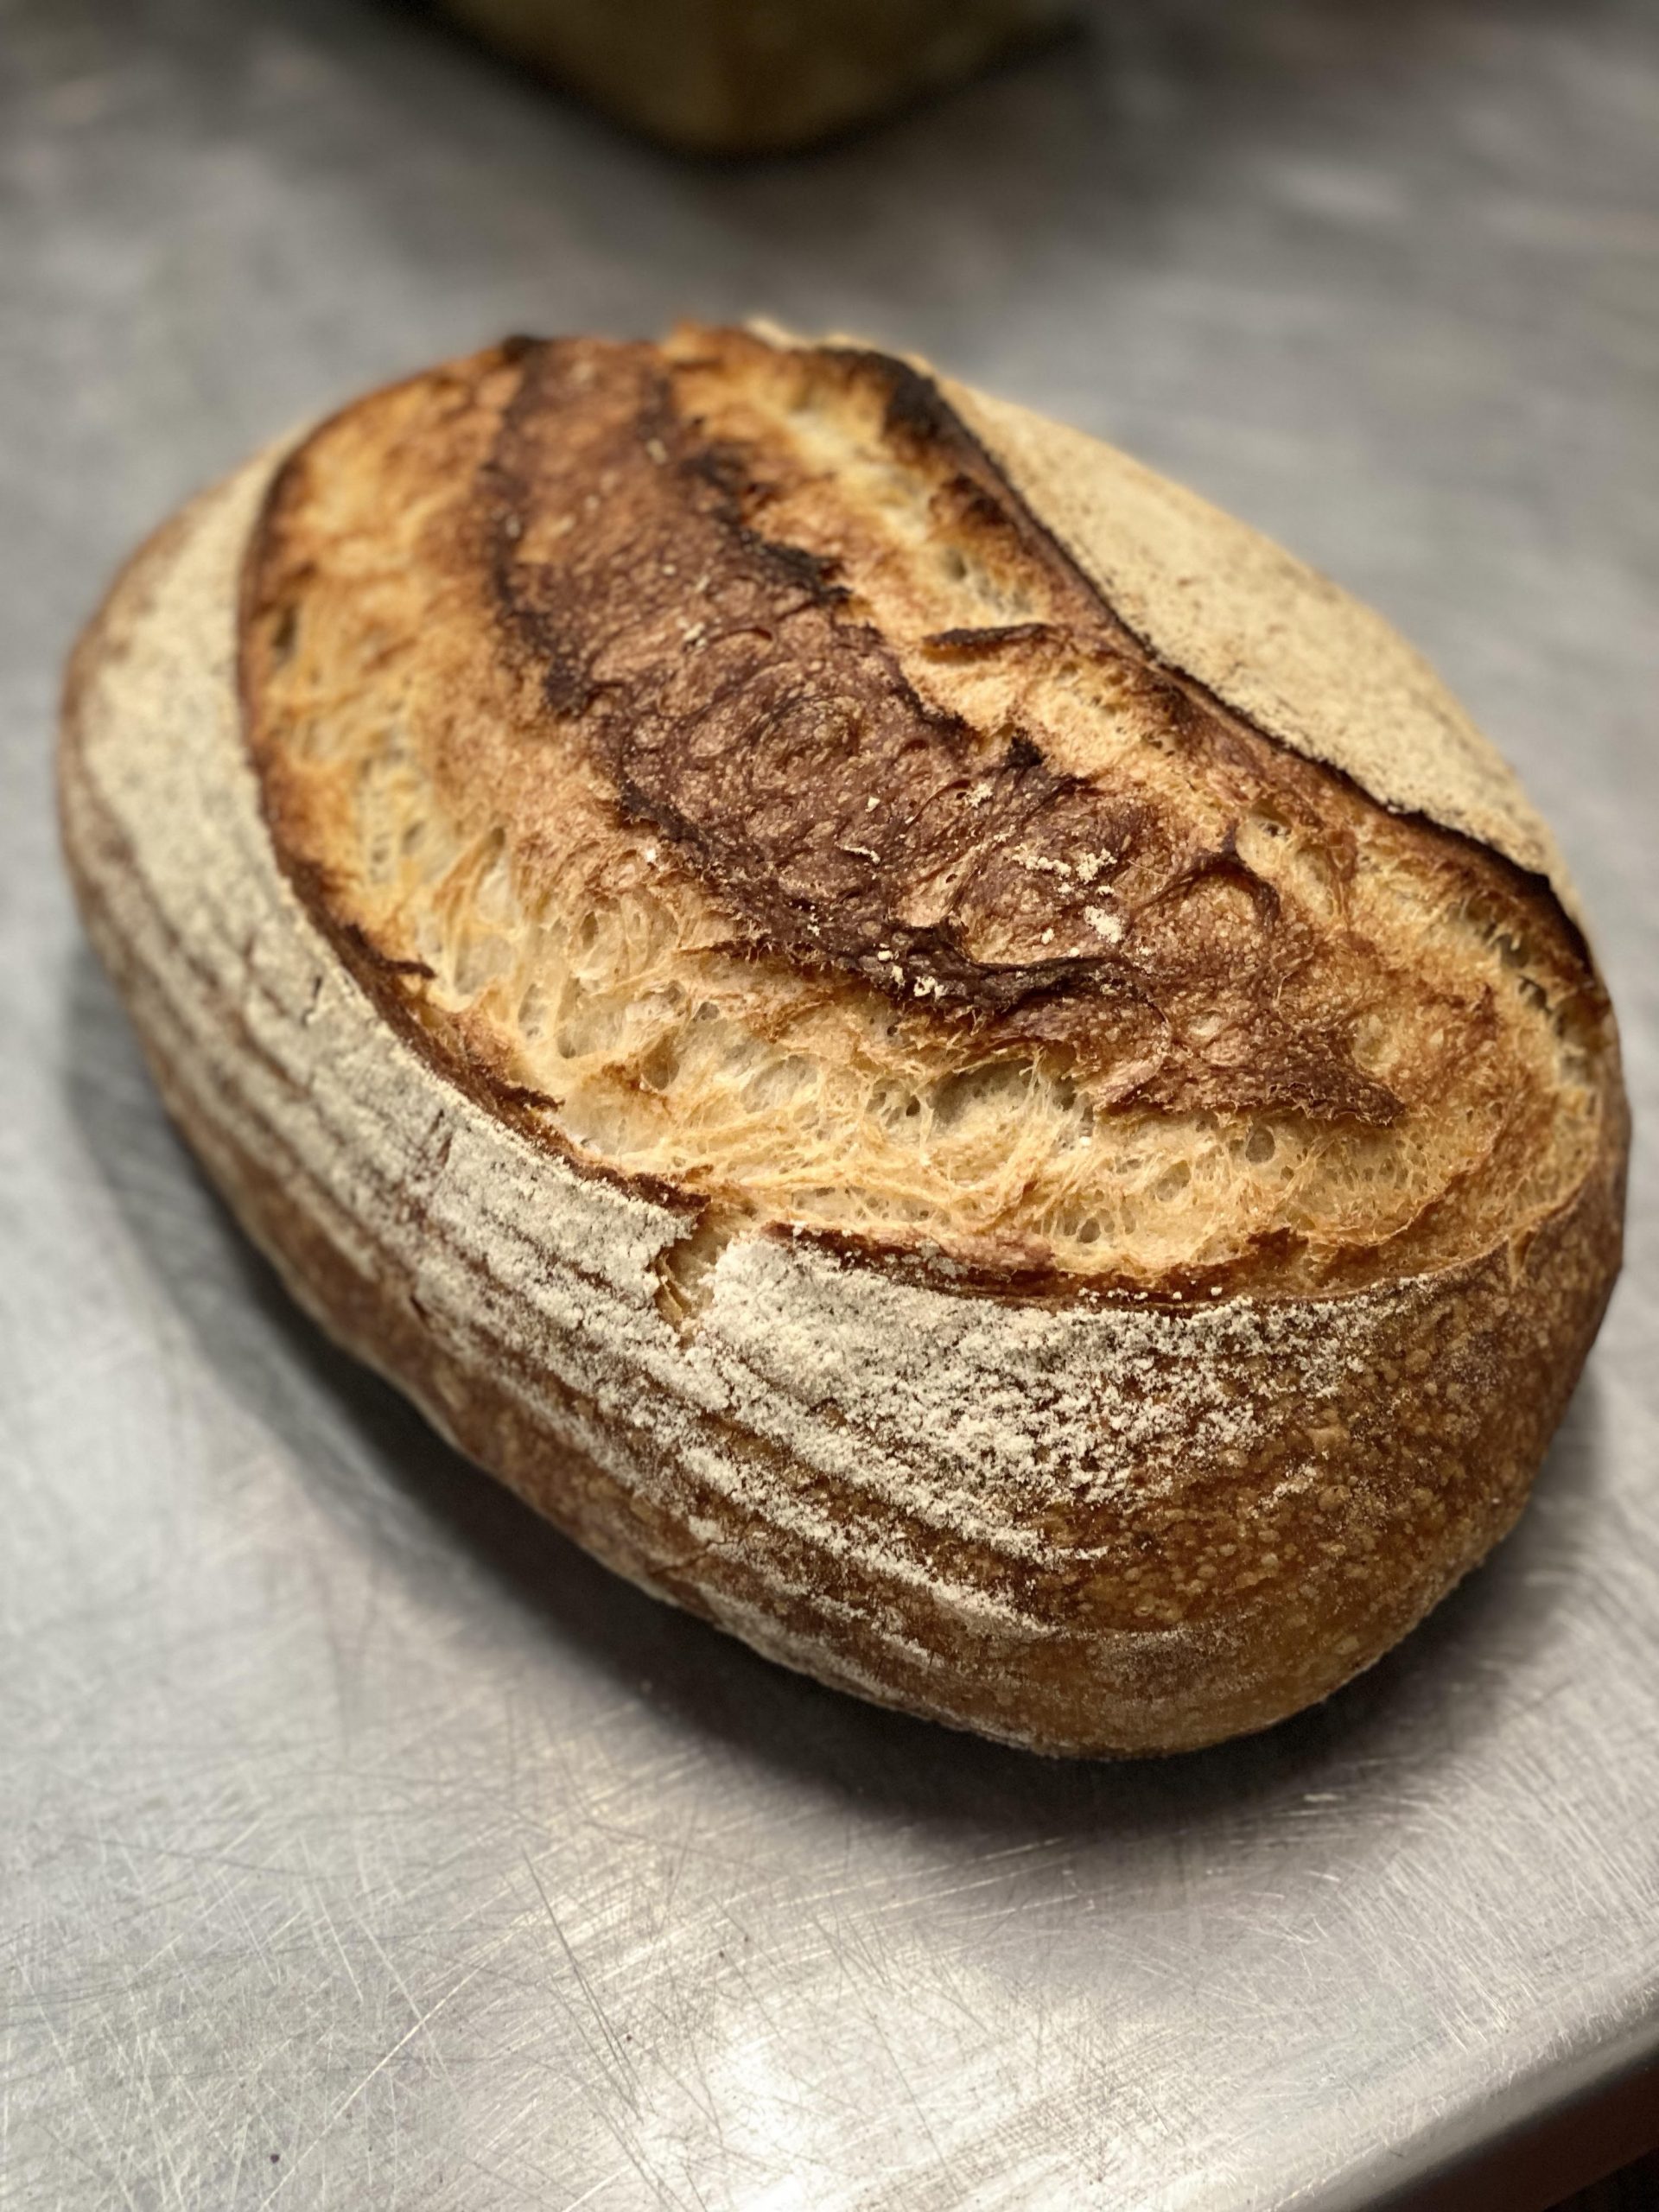 Bakehouse by Baked in Brick sourdough